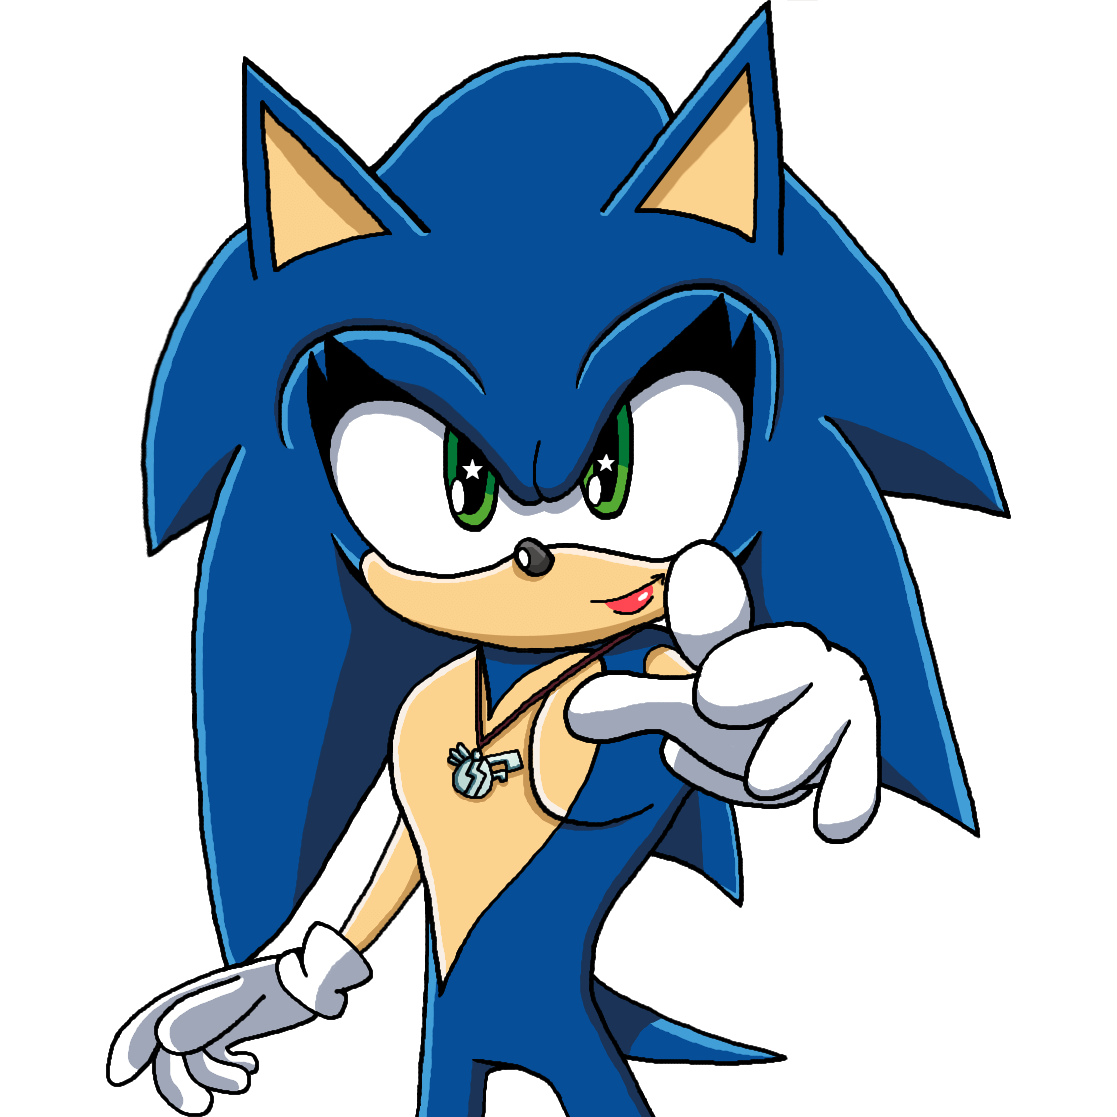 A drawing of femme-presenting Sonic doing the Sonic 2006 pose. Click through to its dedicated webpage for a more detailed description.